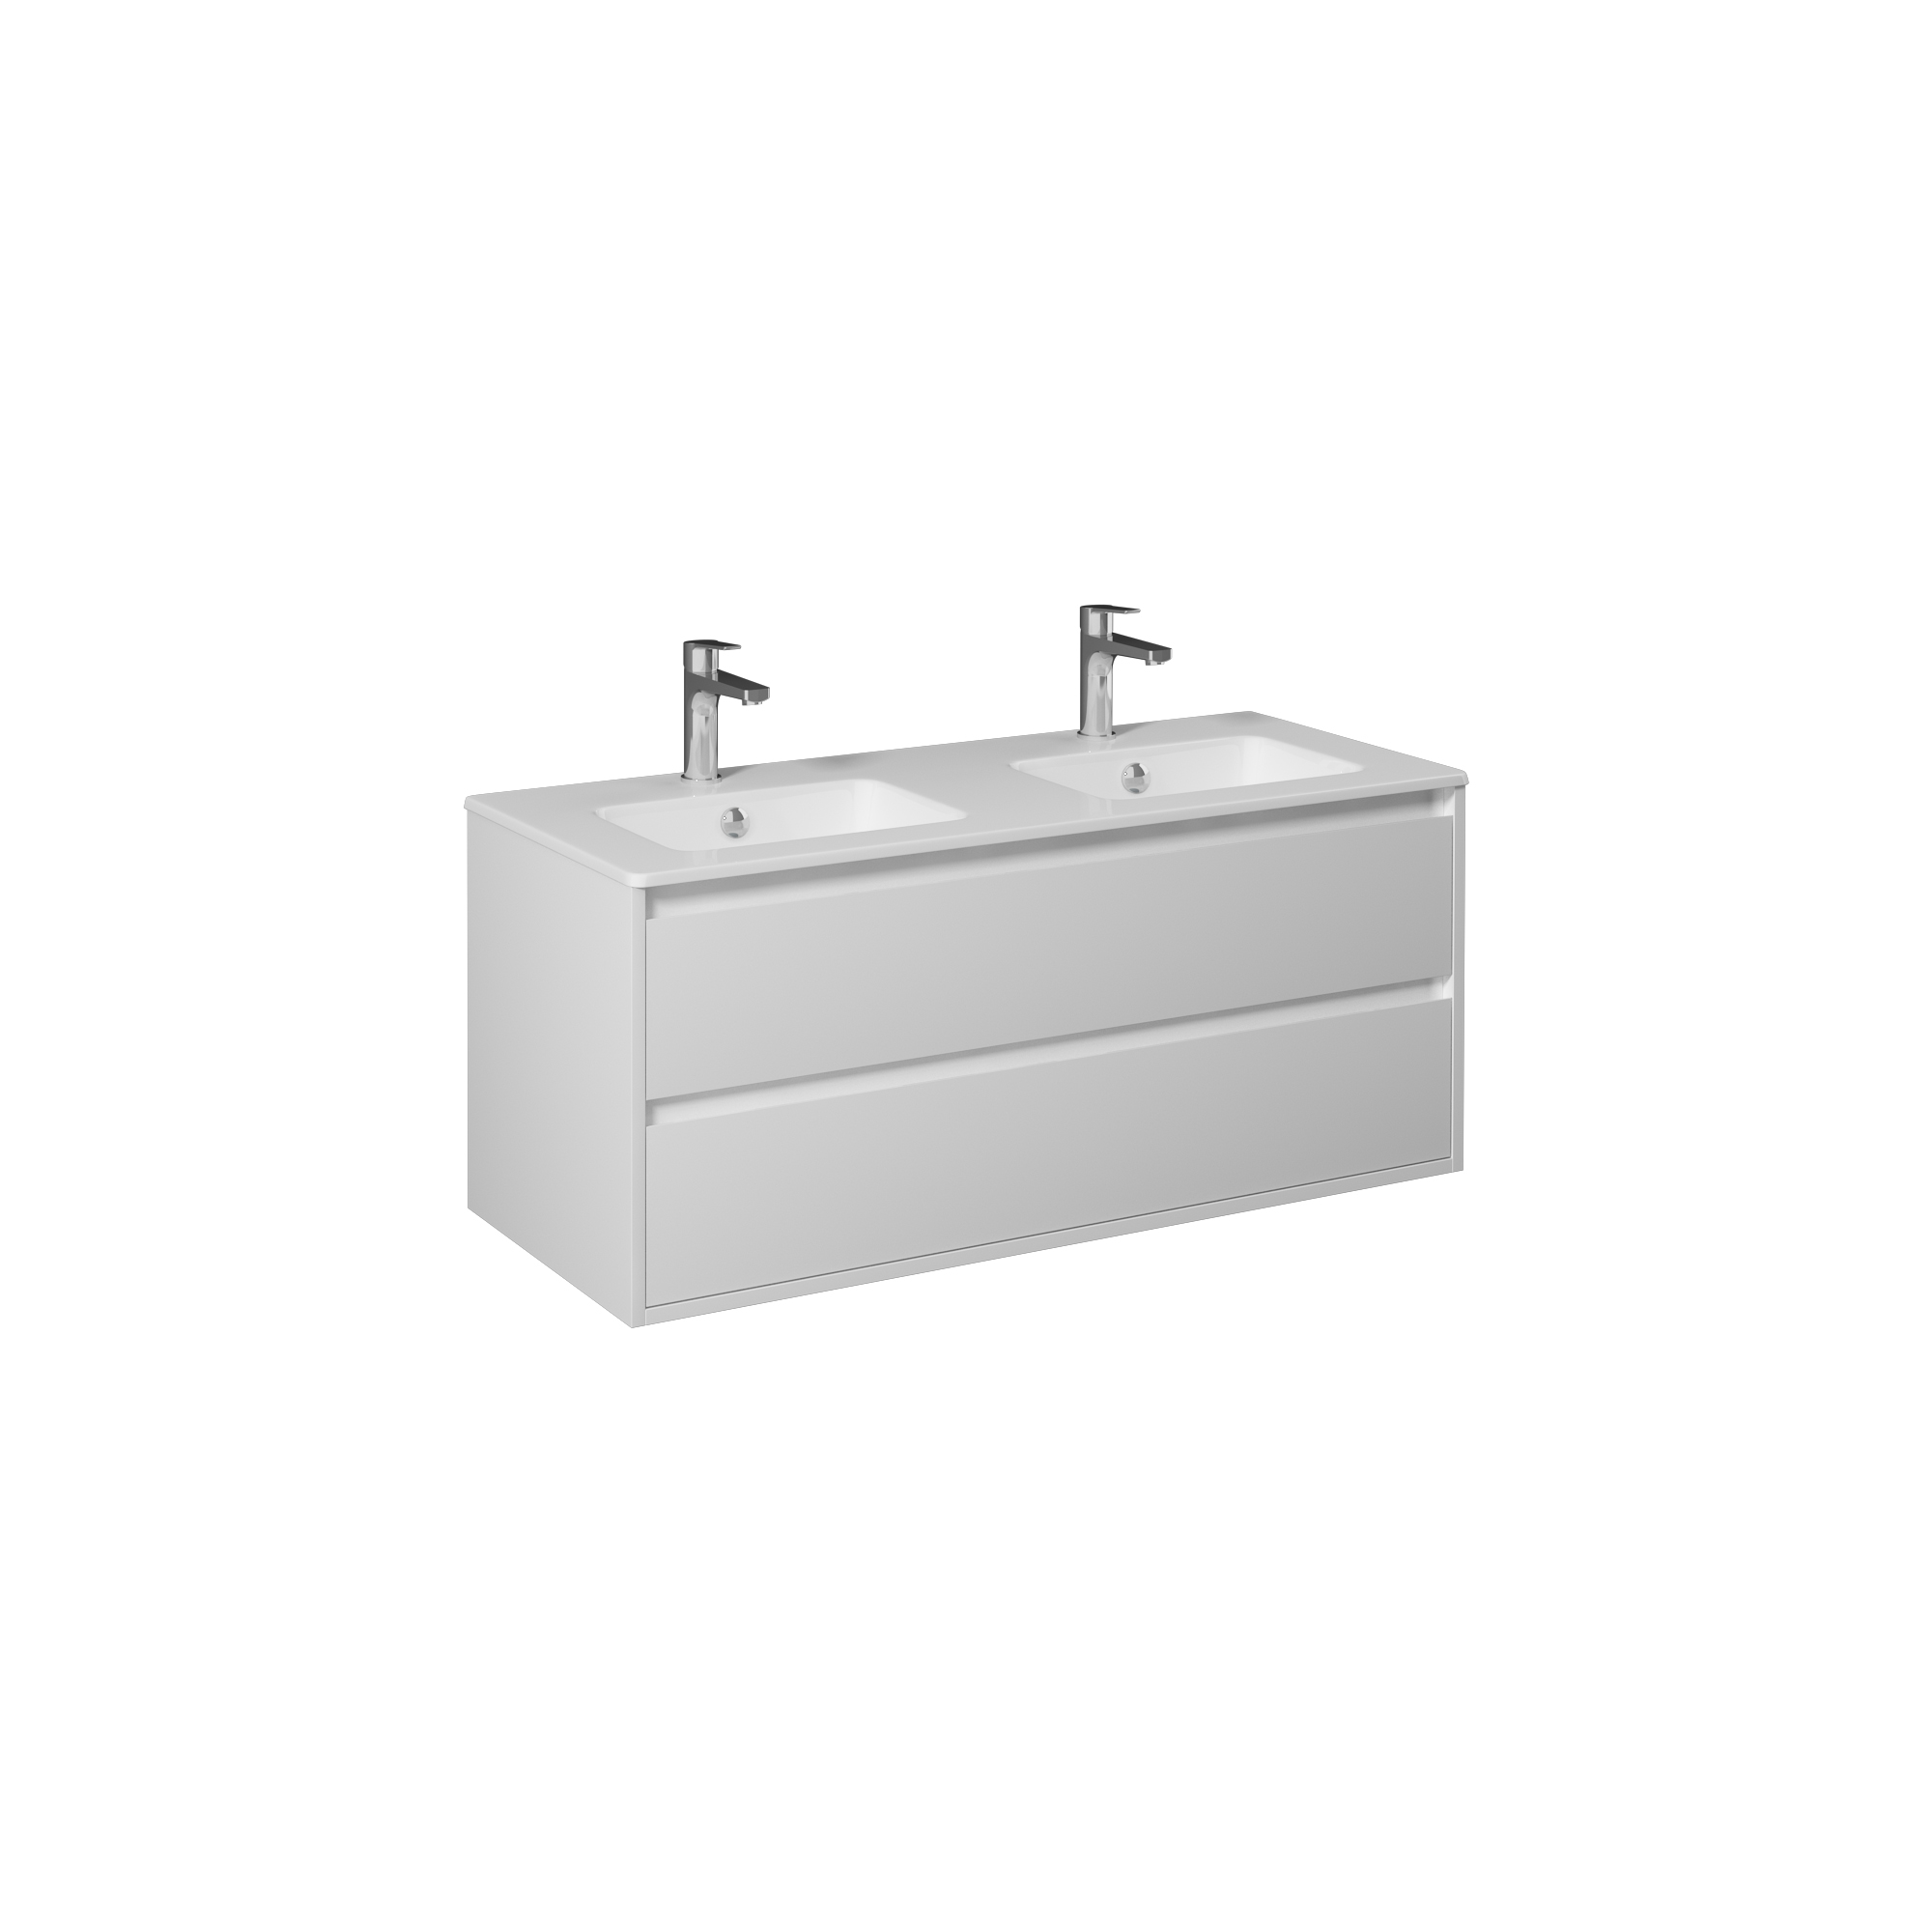 Pro Washbasin Cabinet, White 47"  Lacquer Double Drawer